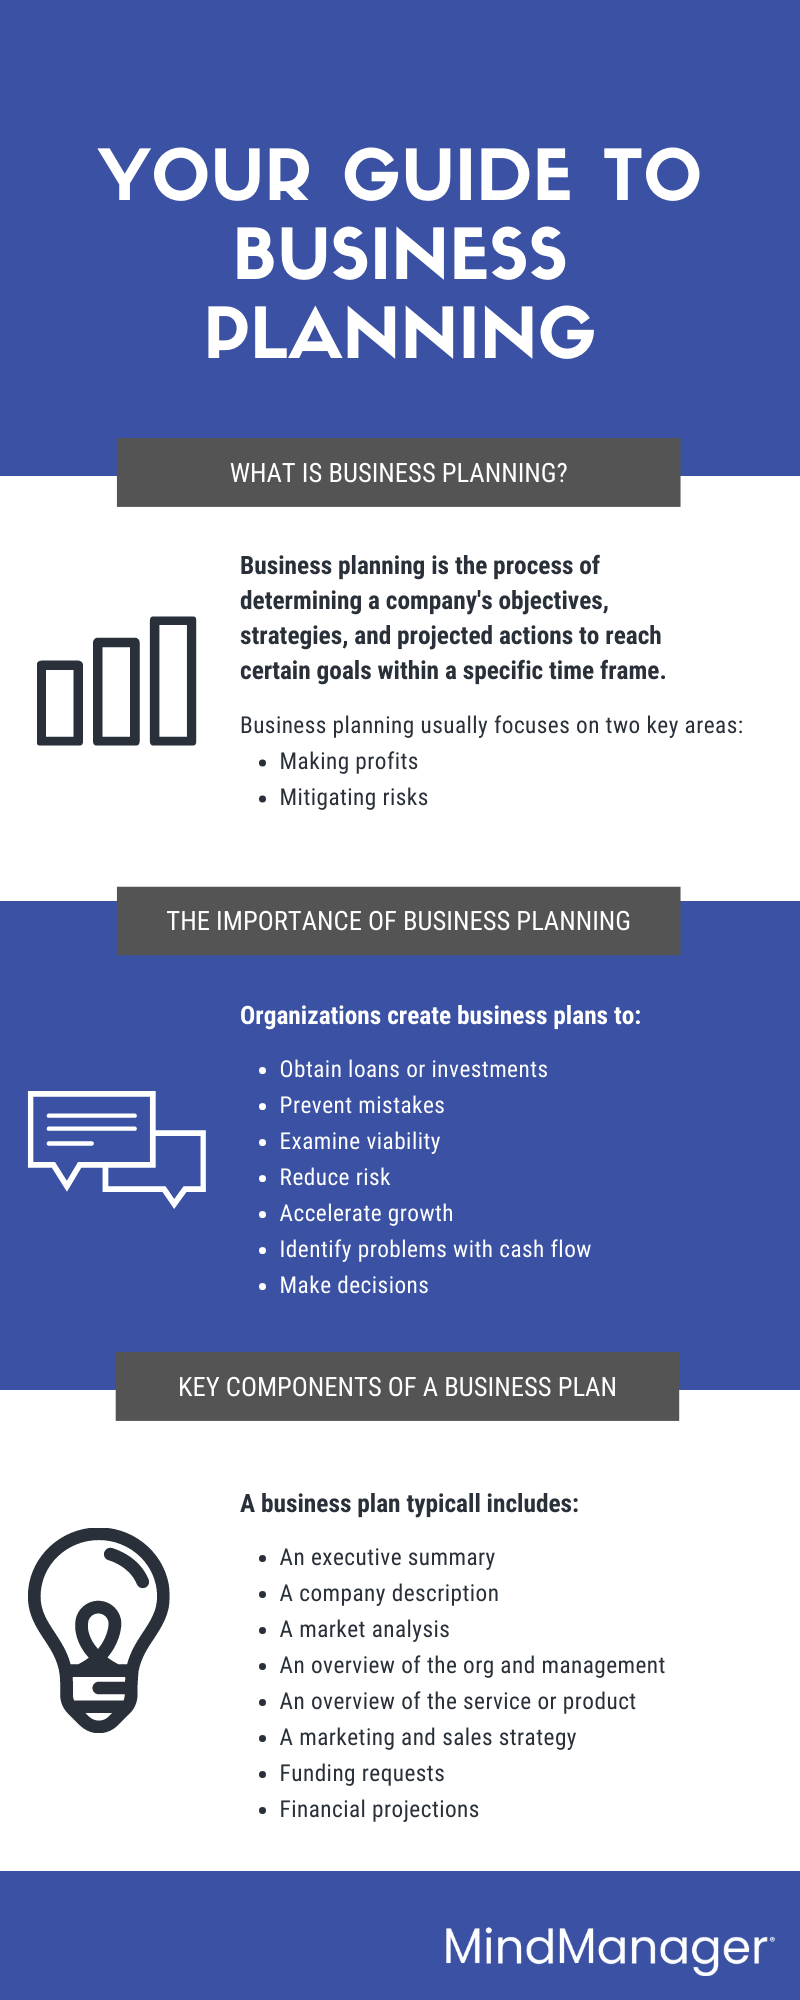 Your guide to business planning | MindManager Blog